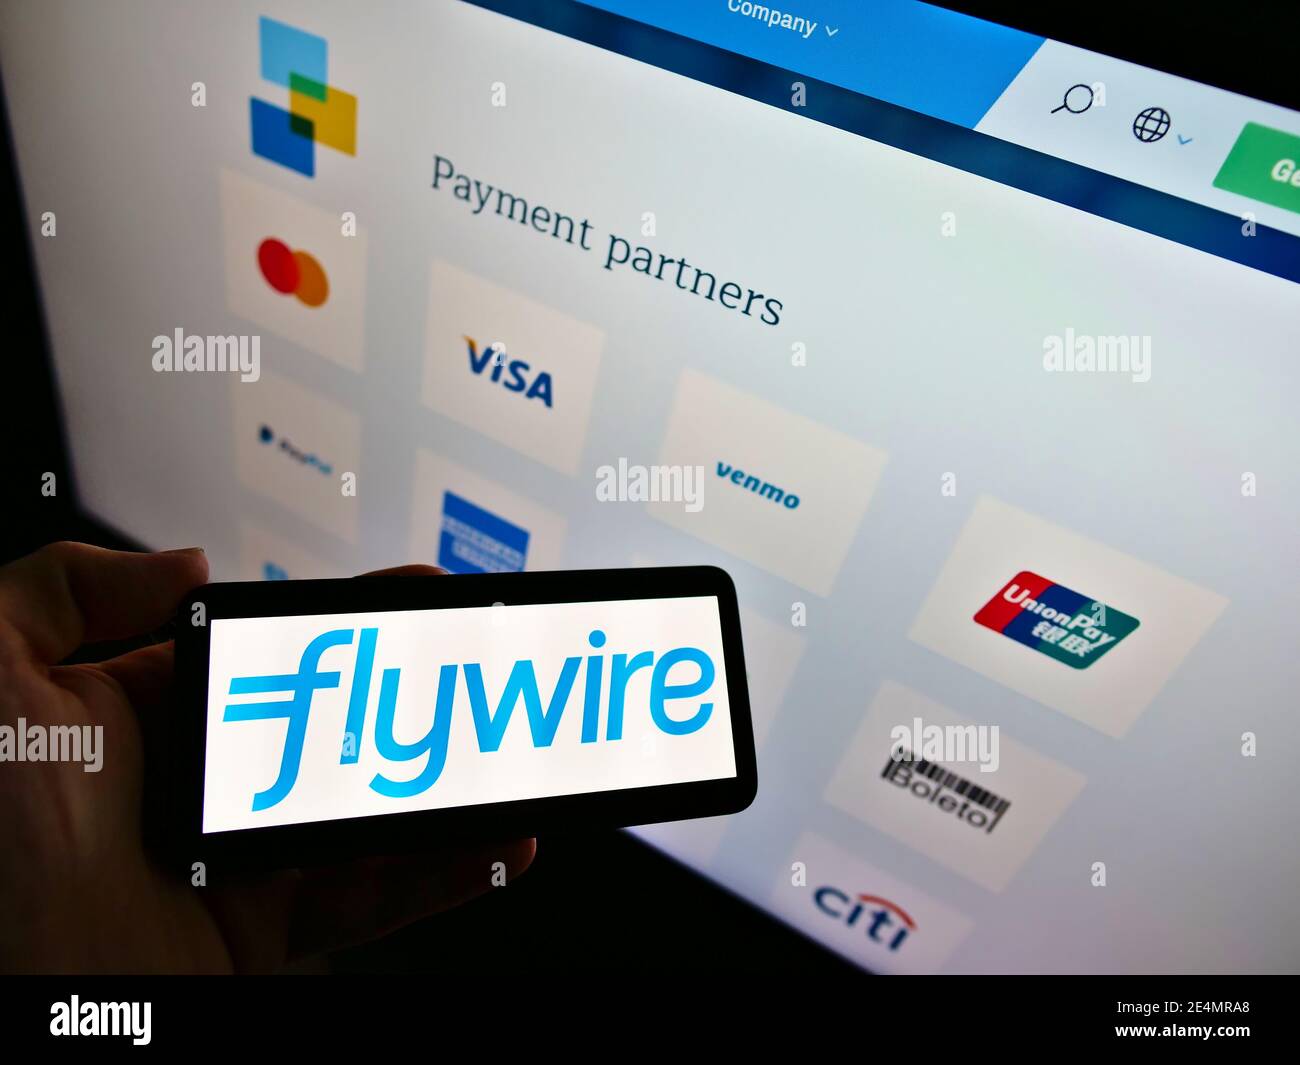 Person holding smartphone with logo of payment services provider Flywire on screen with the company's payment partners. Focus in cellphone display. Stock Photo